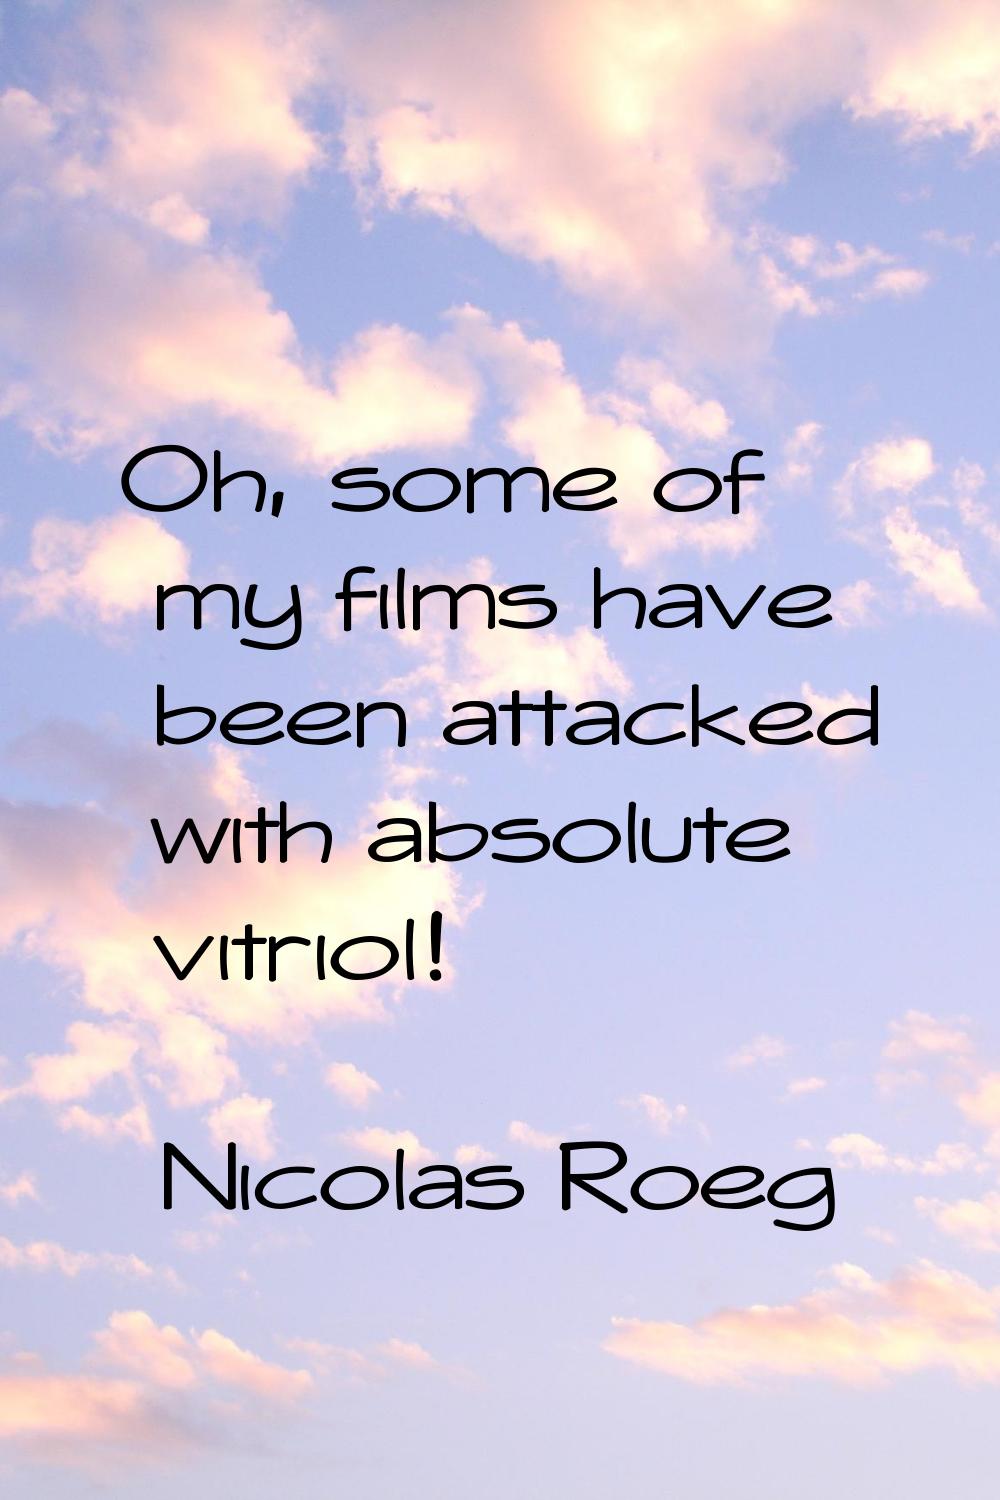 Oh, some of my films have been attacked with absolute vitriol!